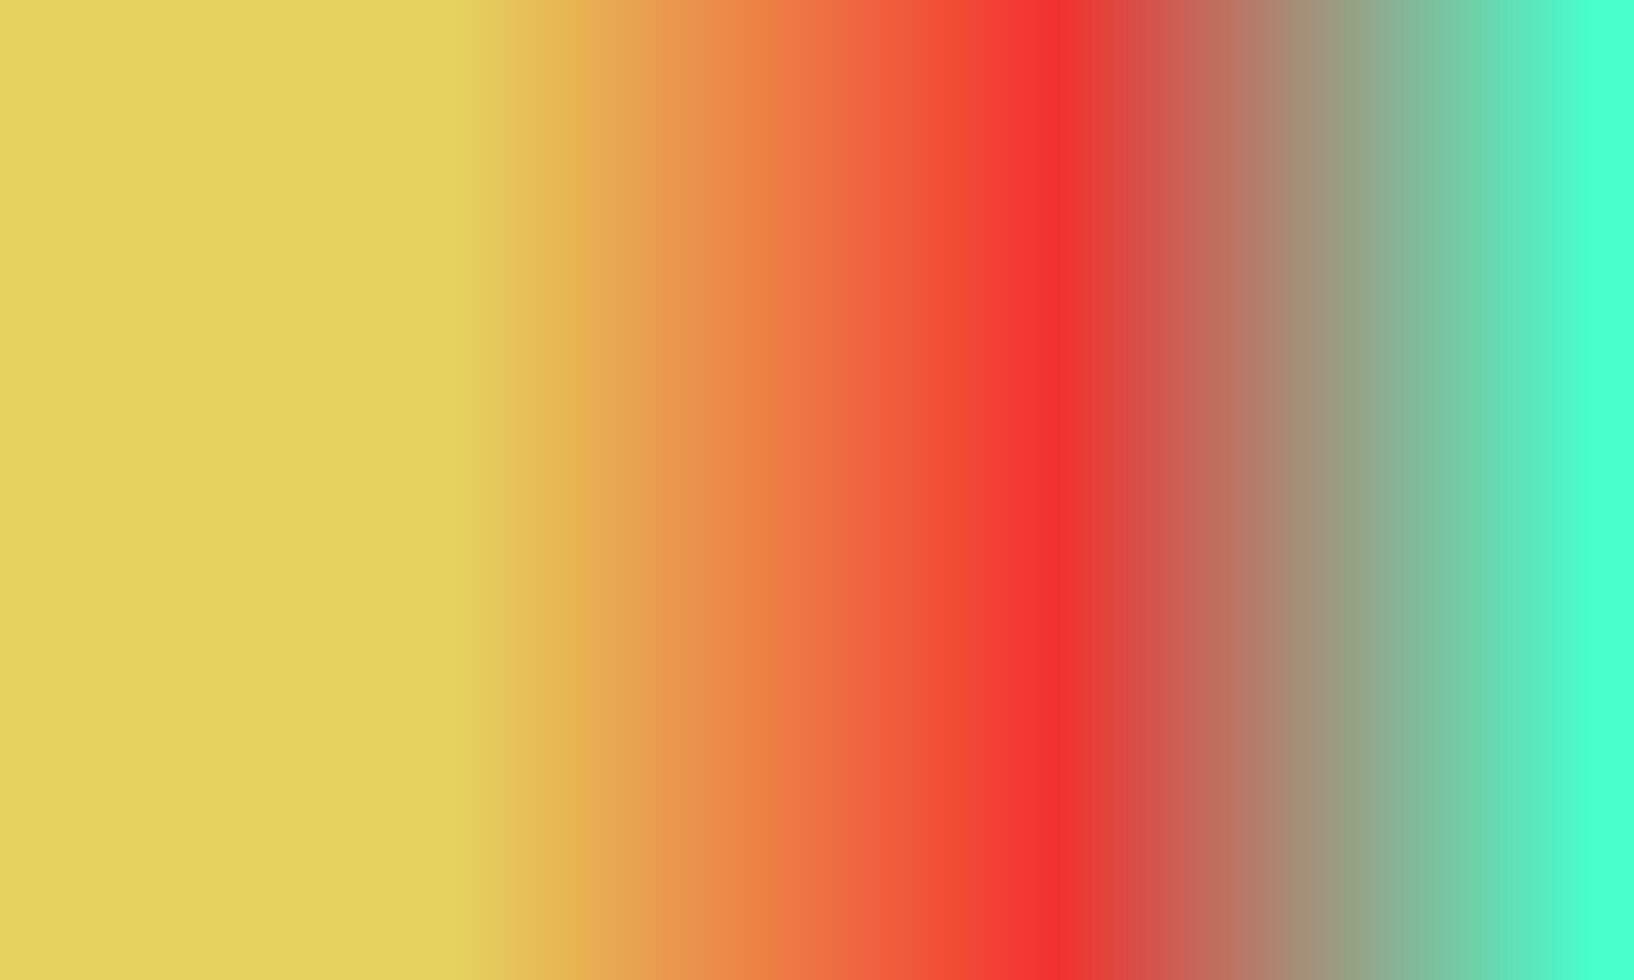 Design simple cyan,red and yellow gradient color illustration background photo